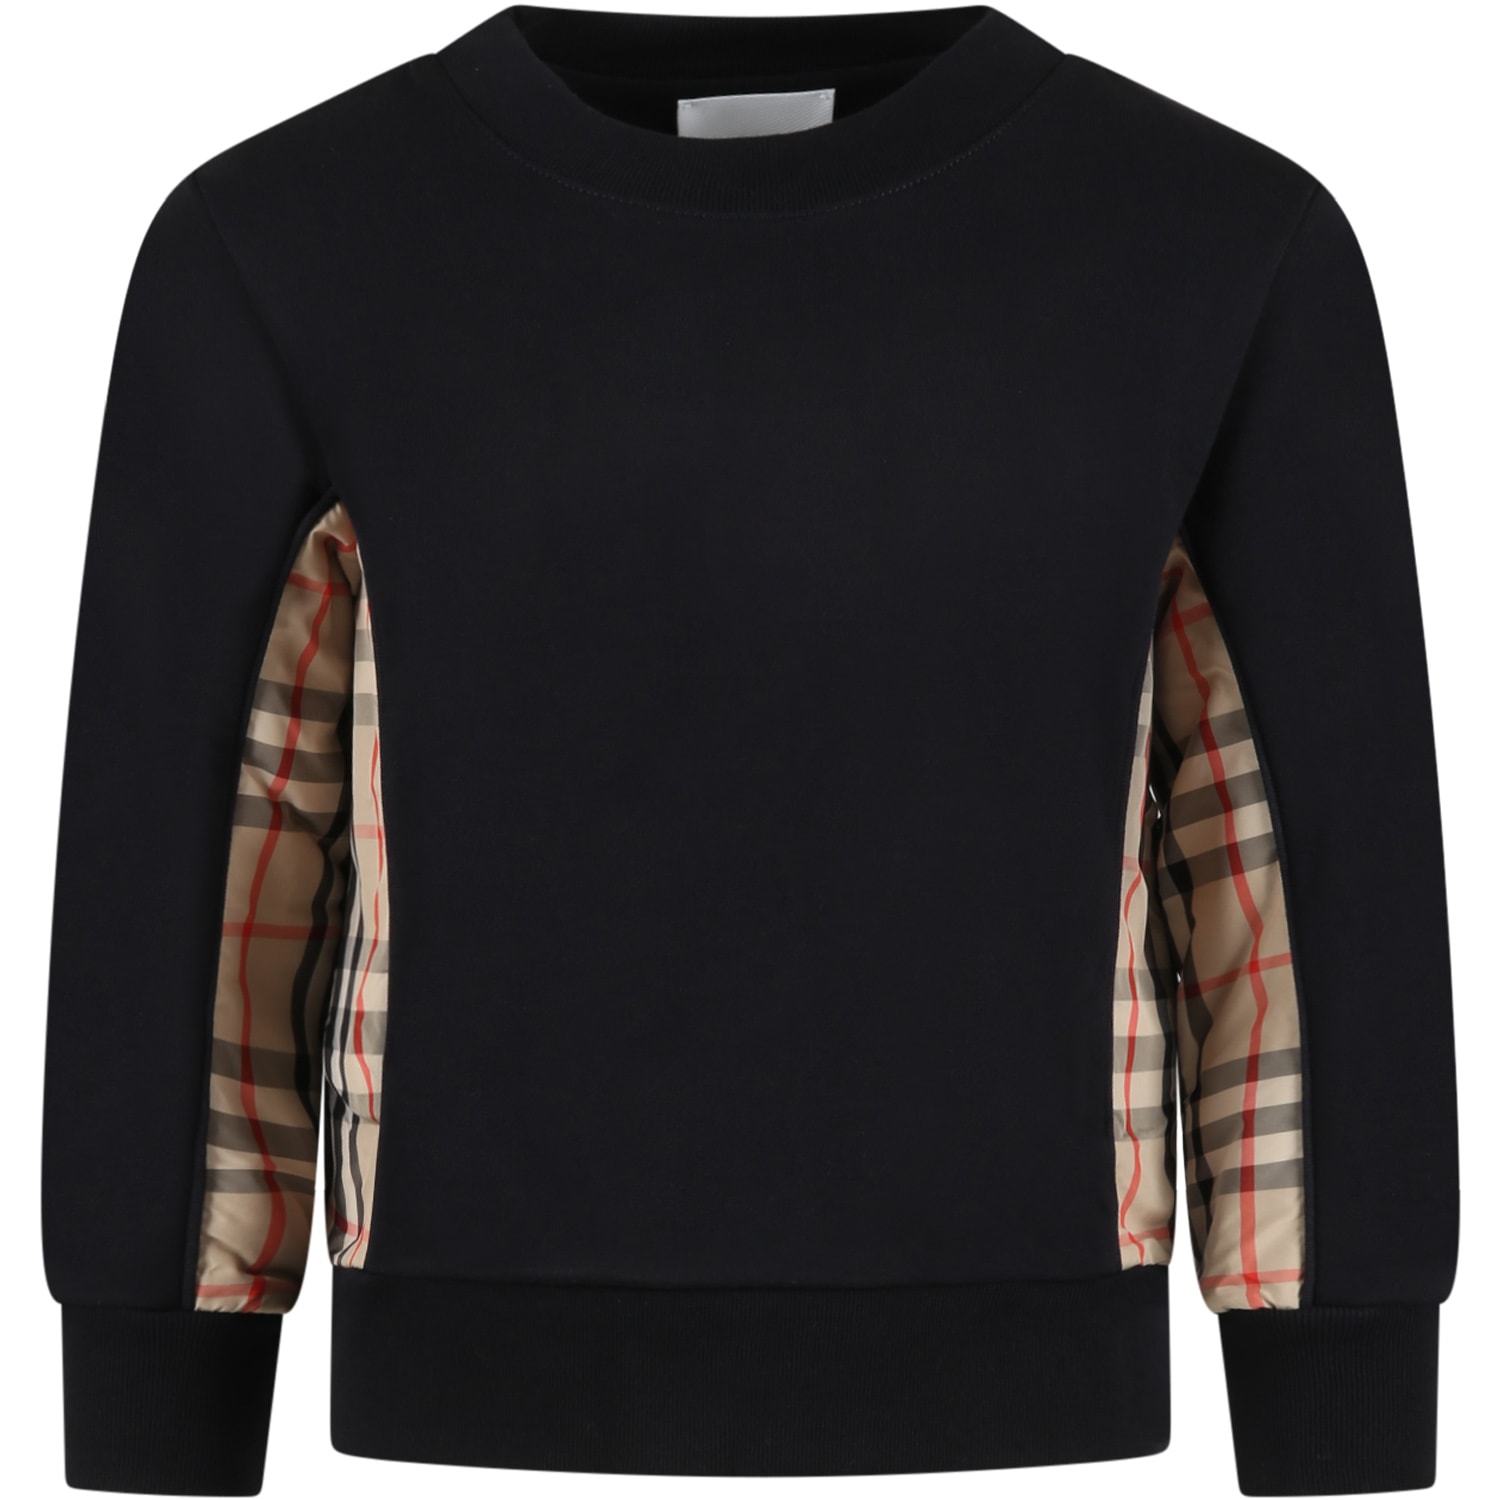 Burberry Black Sweatshirt For Kids With Vintage Check